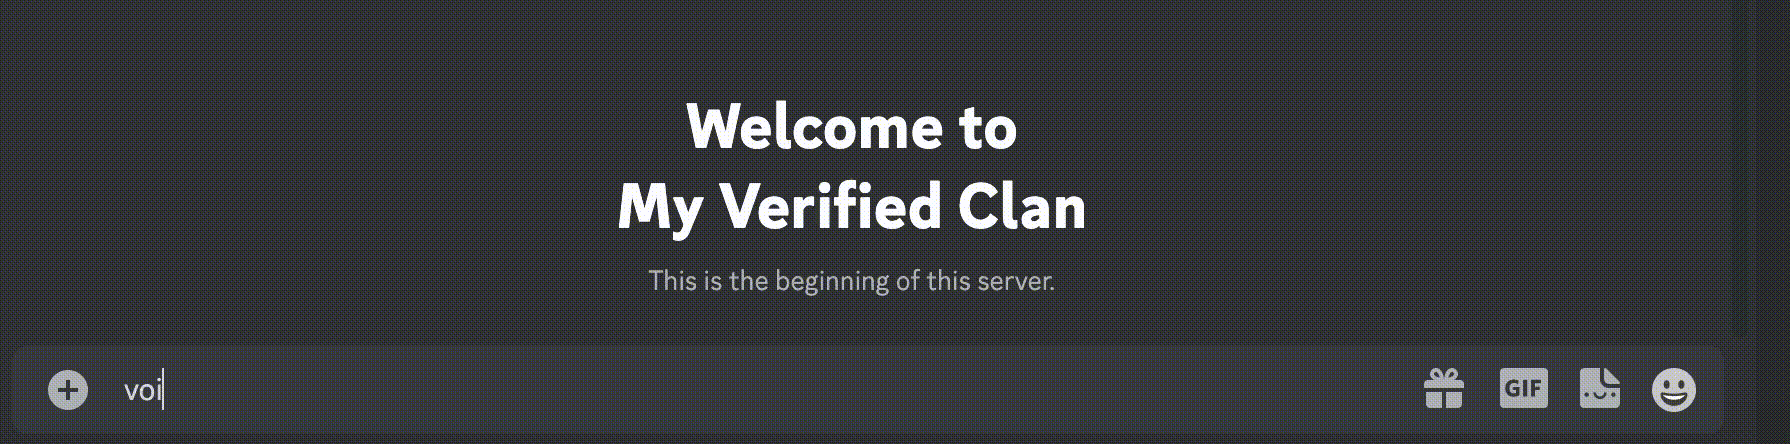 How to setup AutoMod for your clan server!